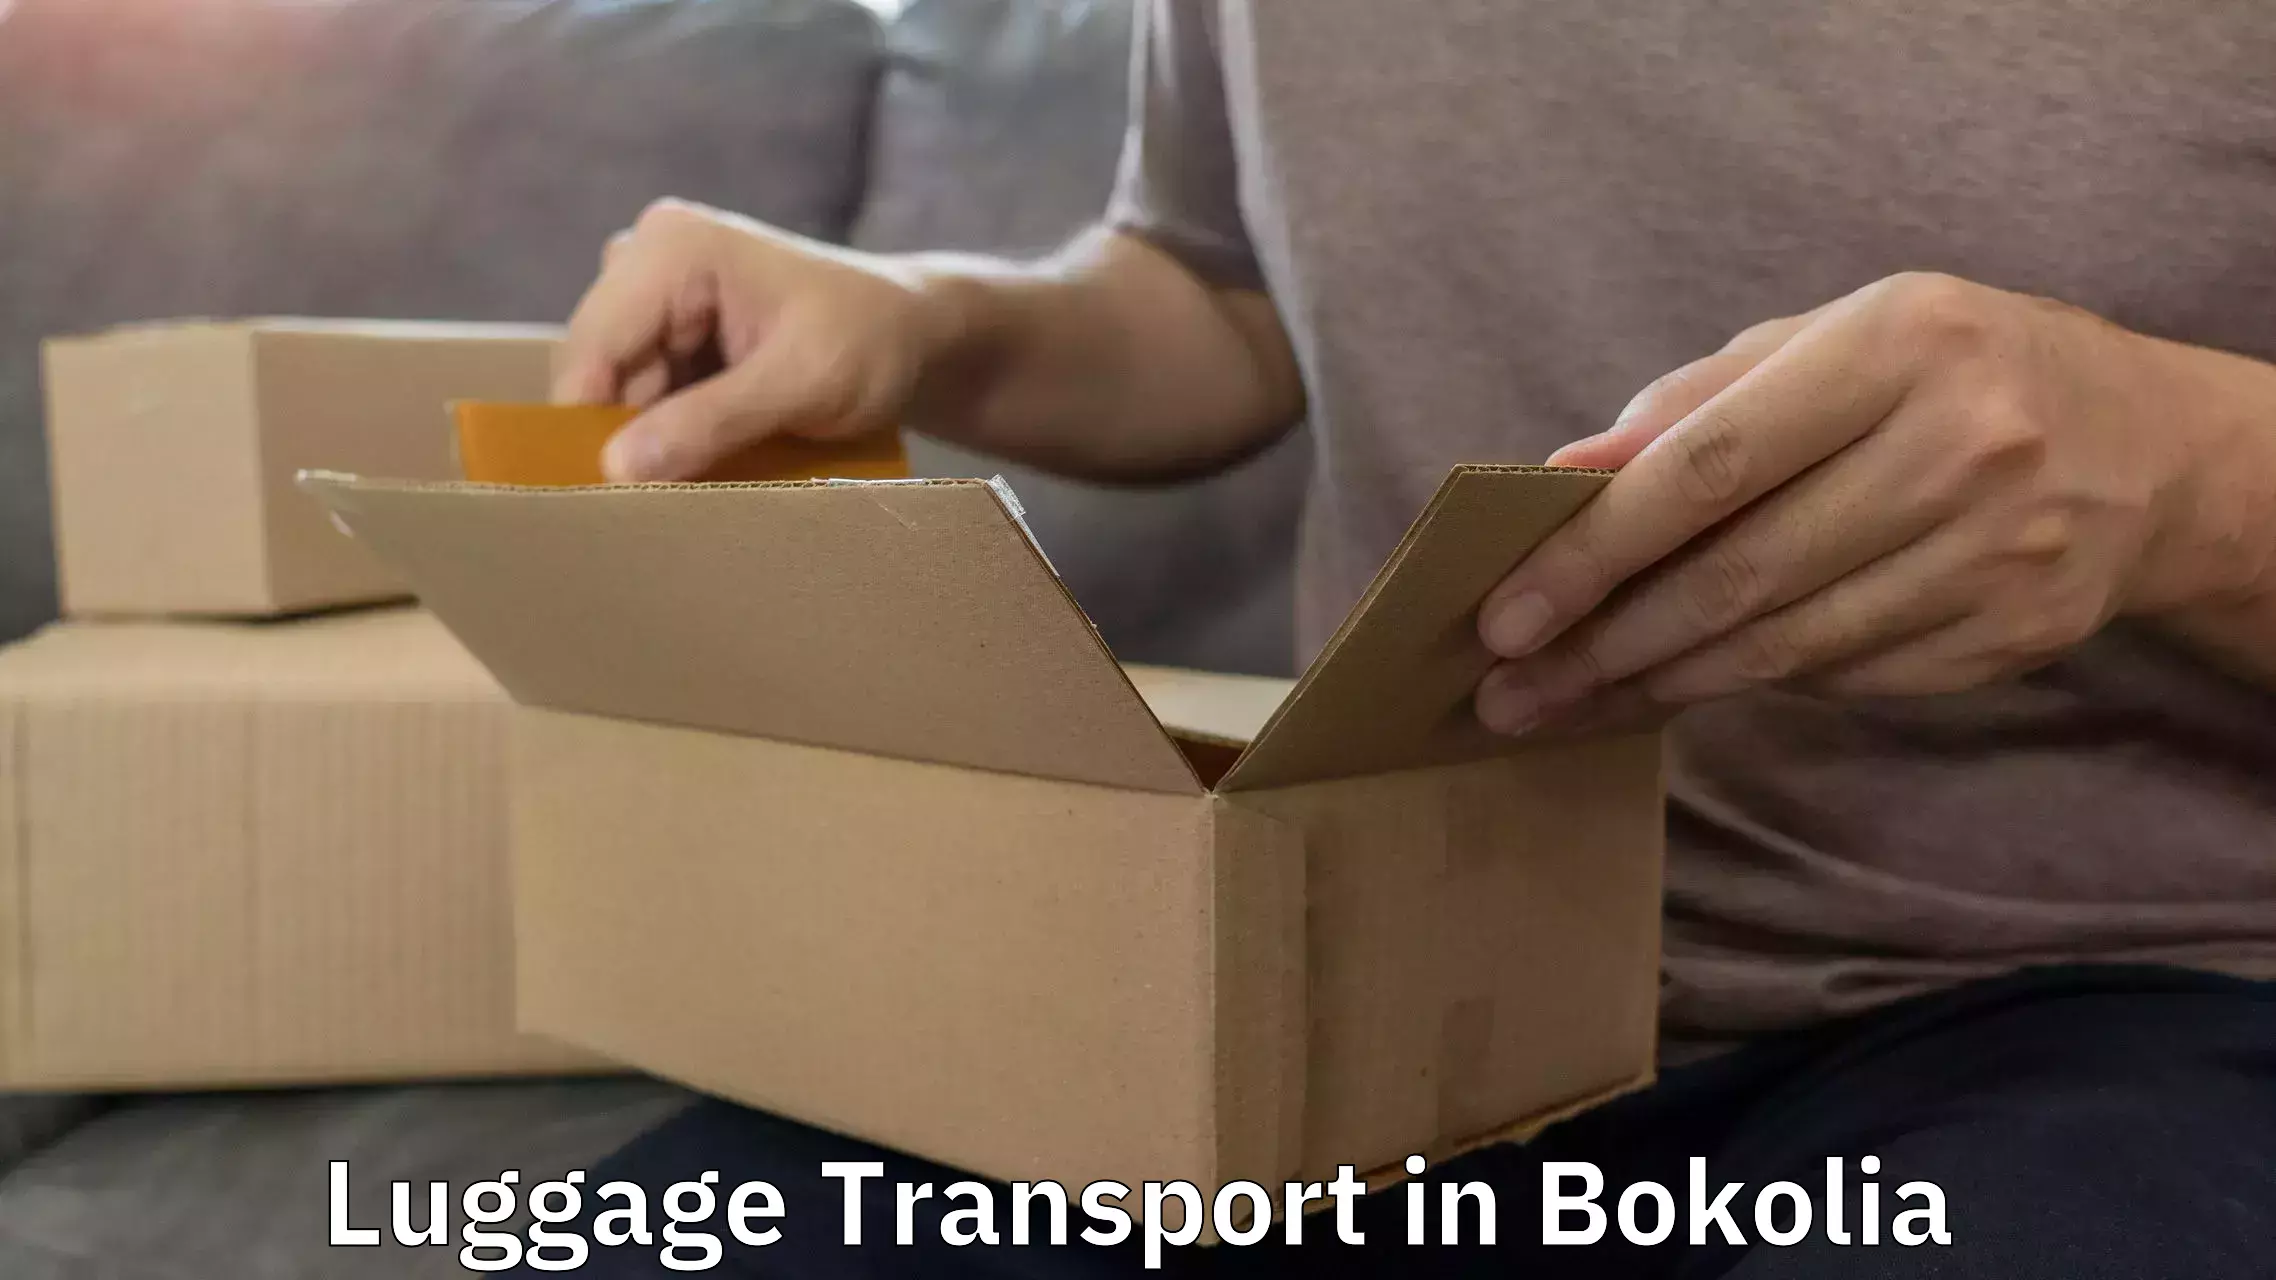 Personal luggage delivery in Bokolia